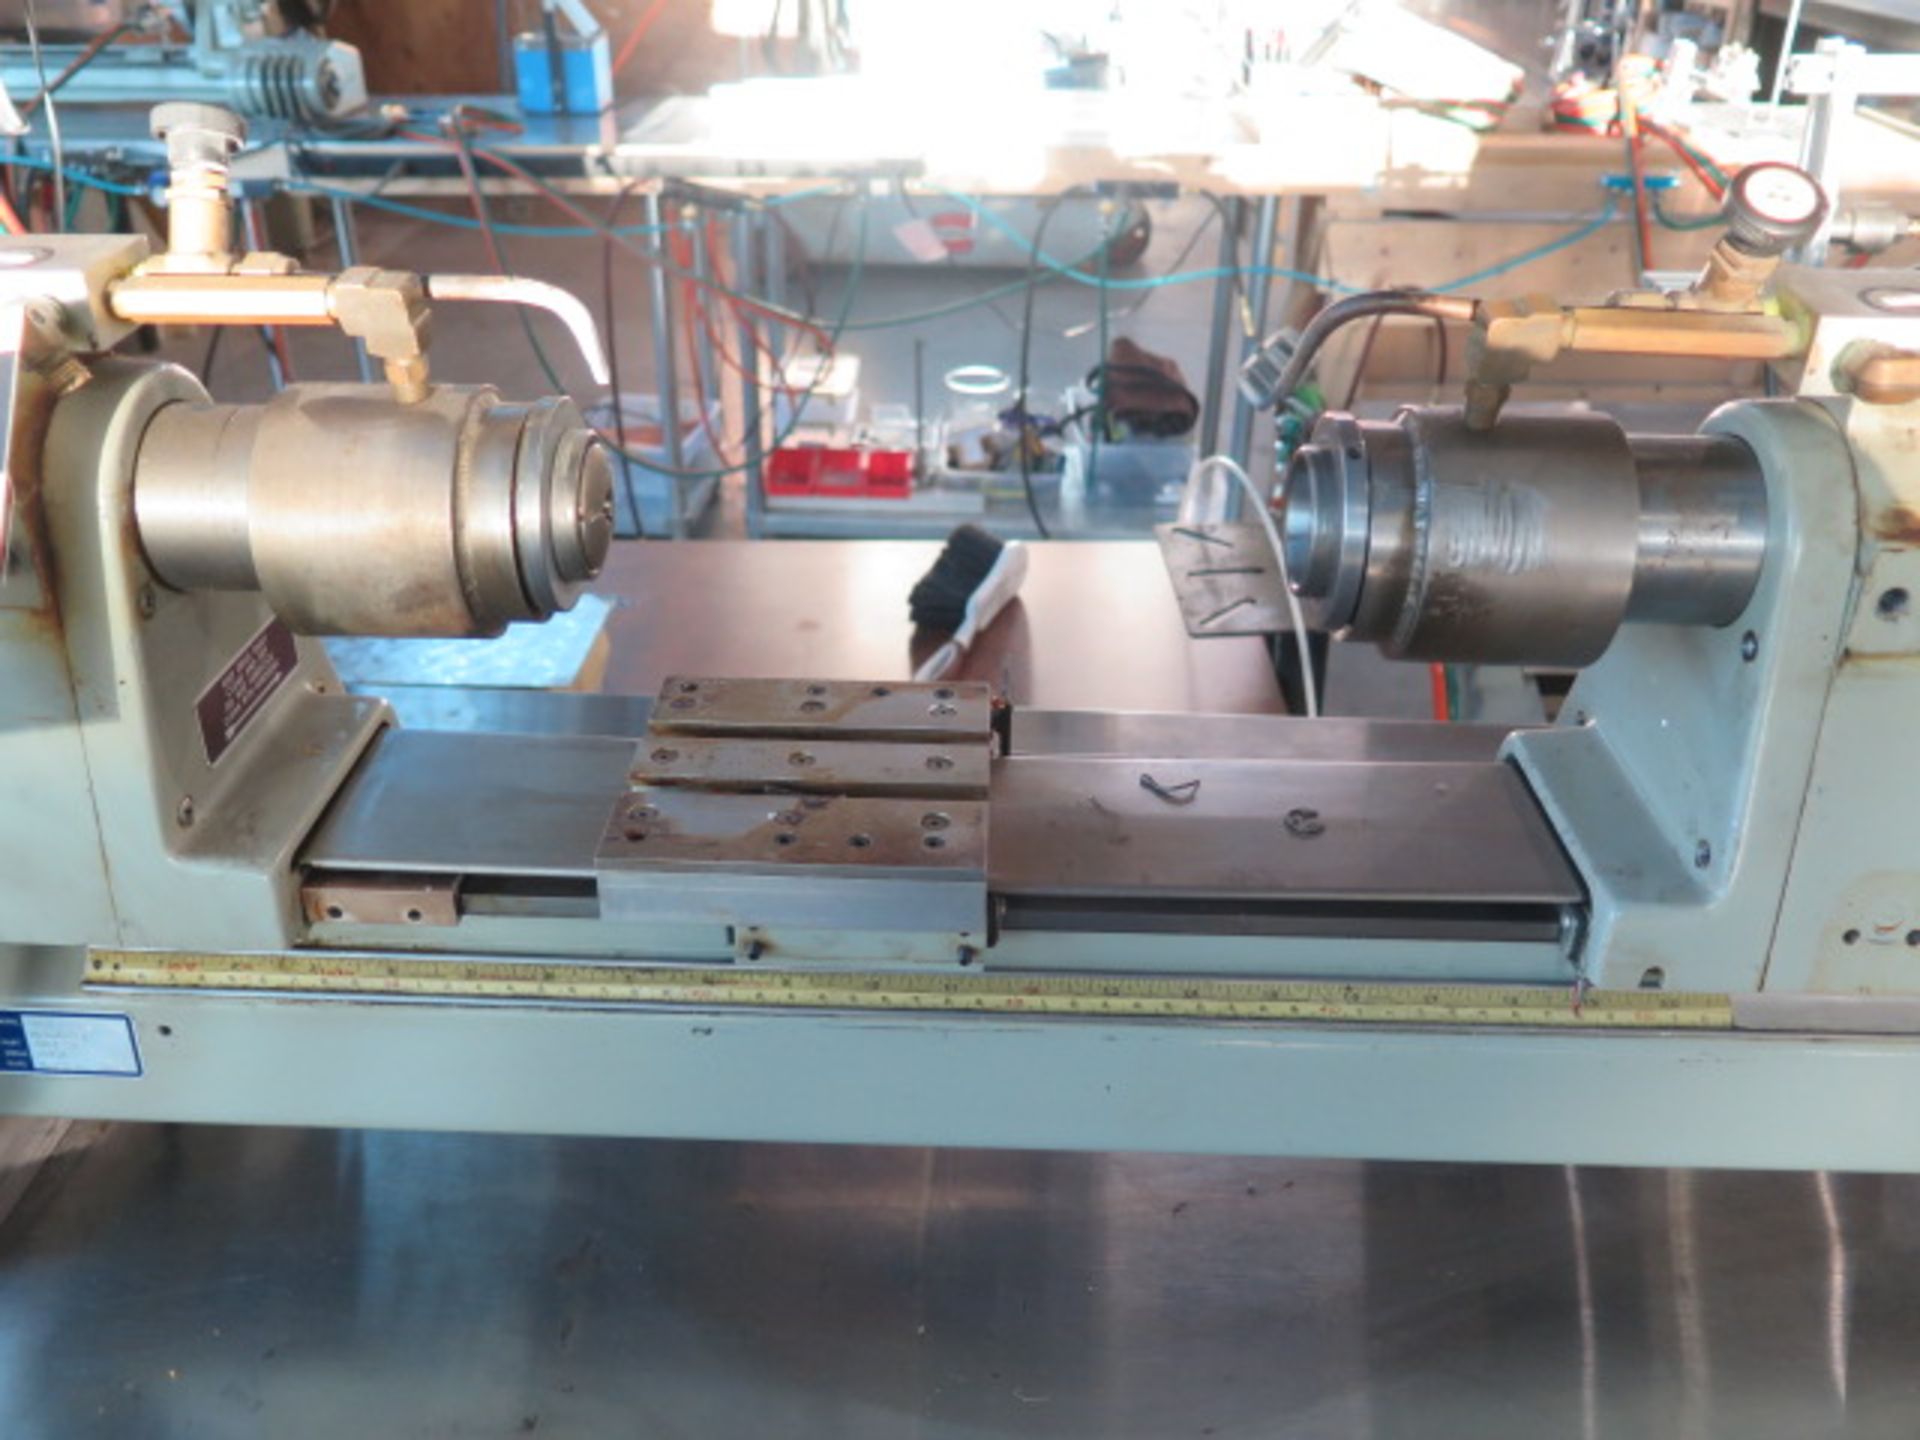 2000 Litton mmdl. F053 8” x 12” Glass Lathe s/n 1543R w/ Variable Speed Drive, 5C Colleted Heads, - Image 5 of 7